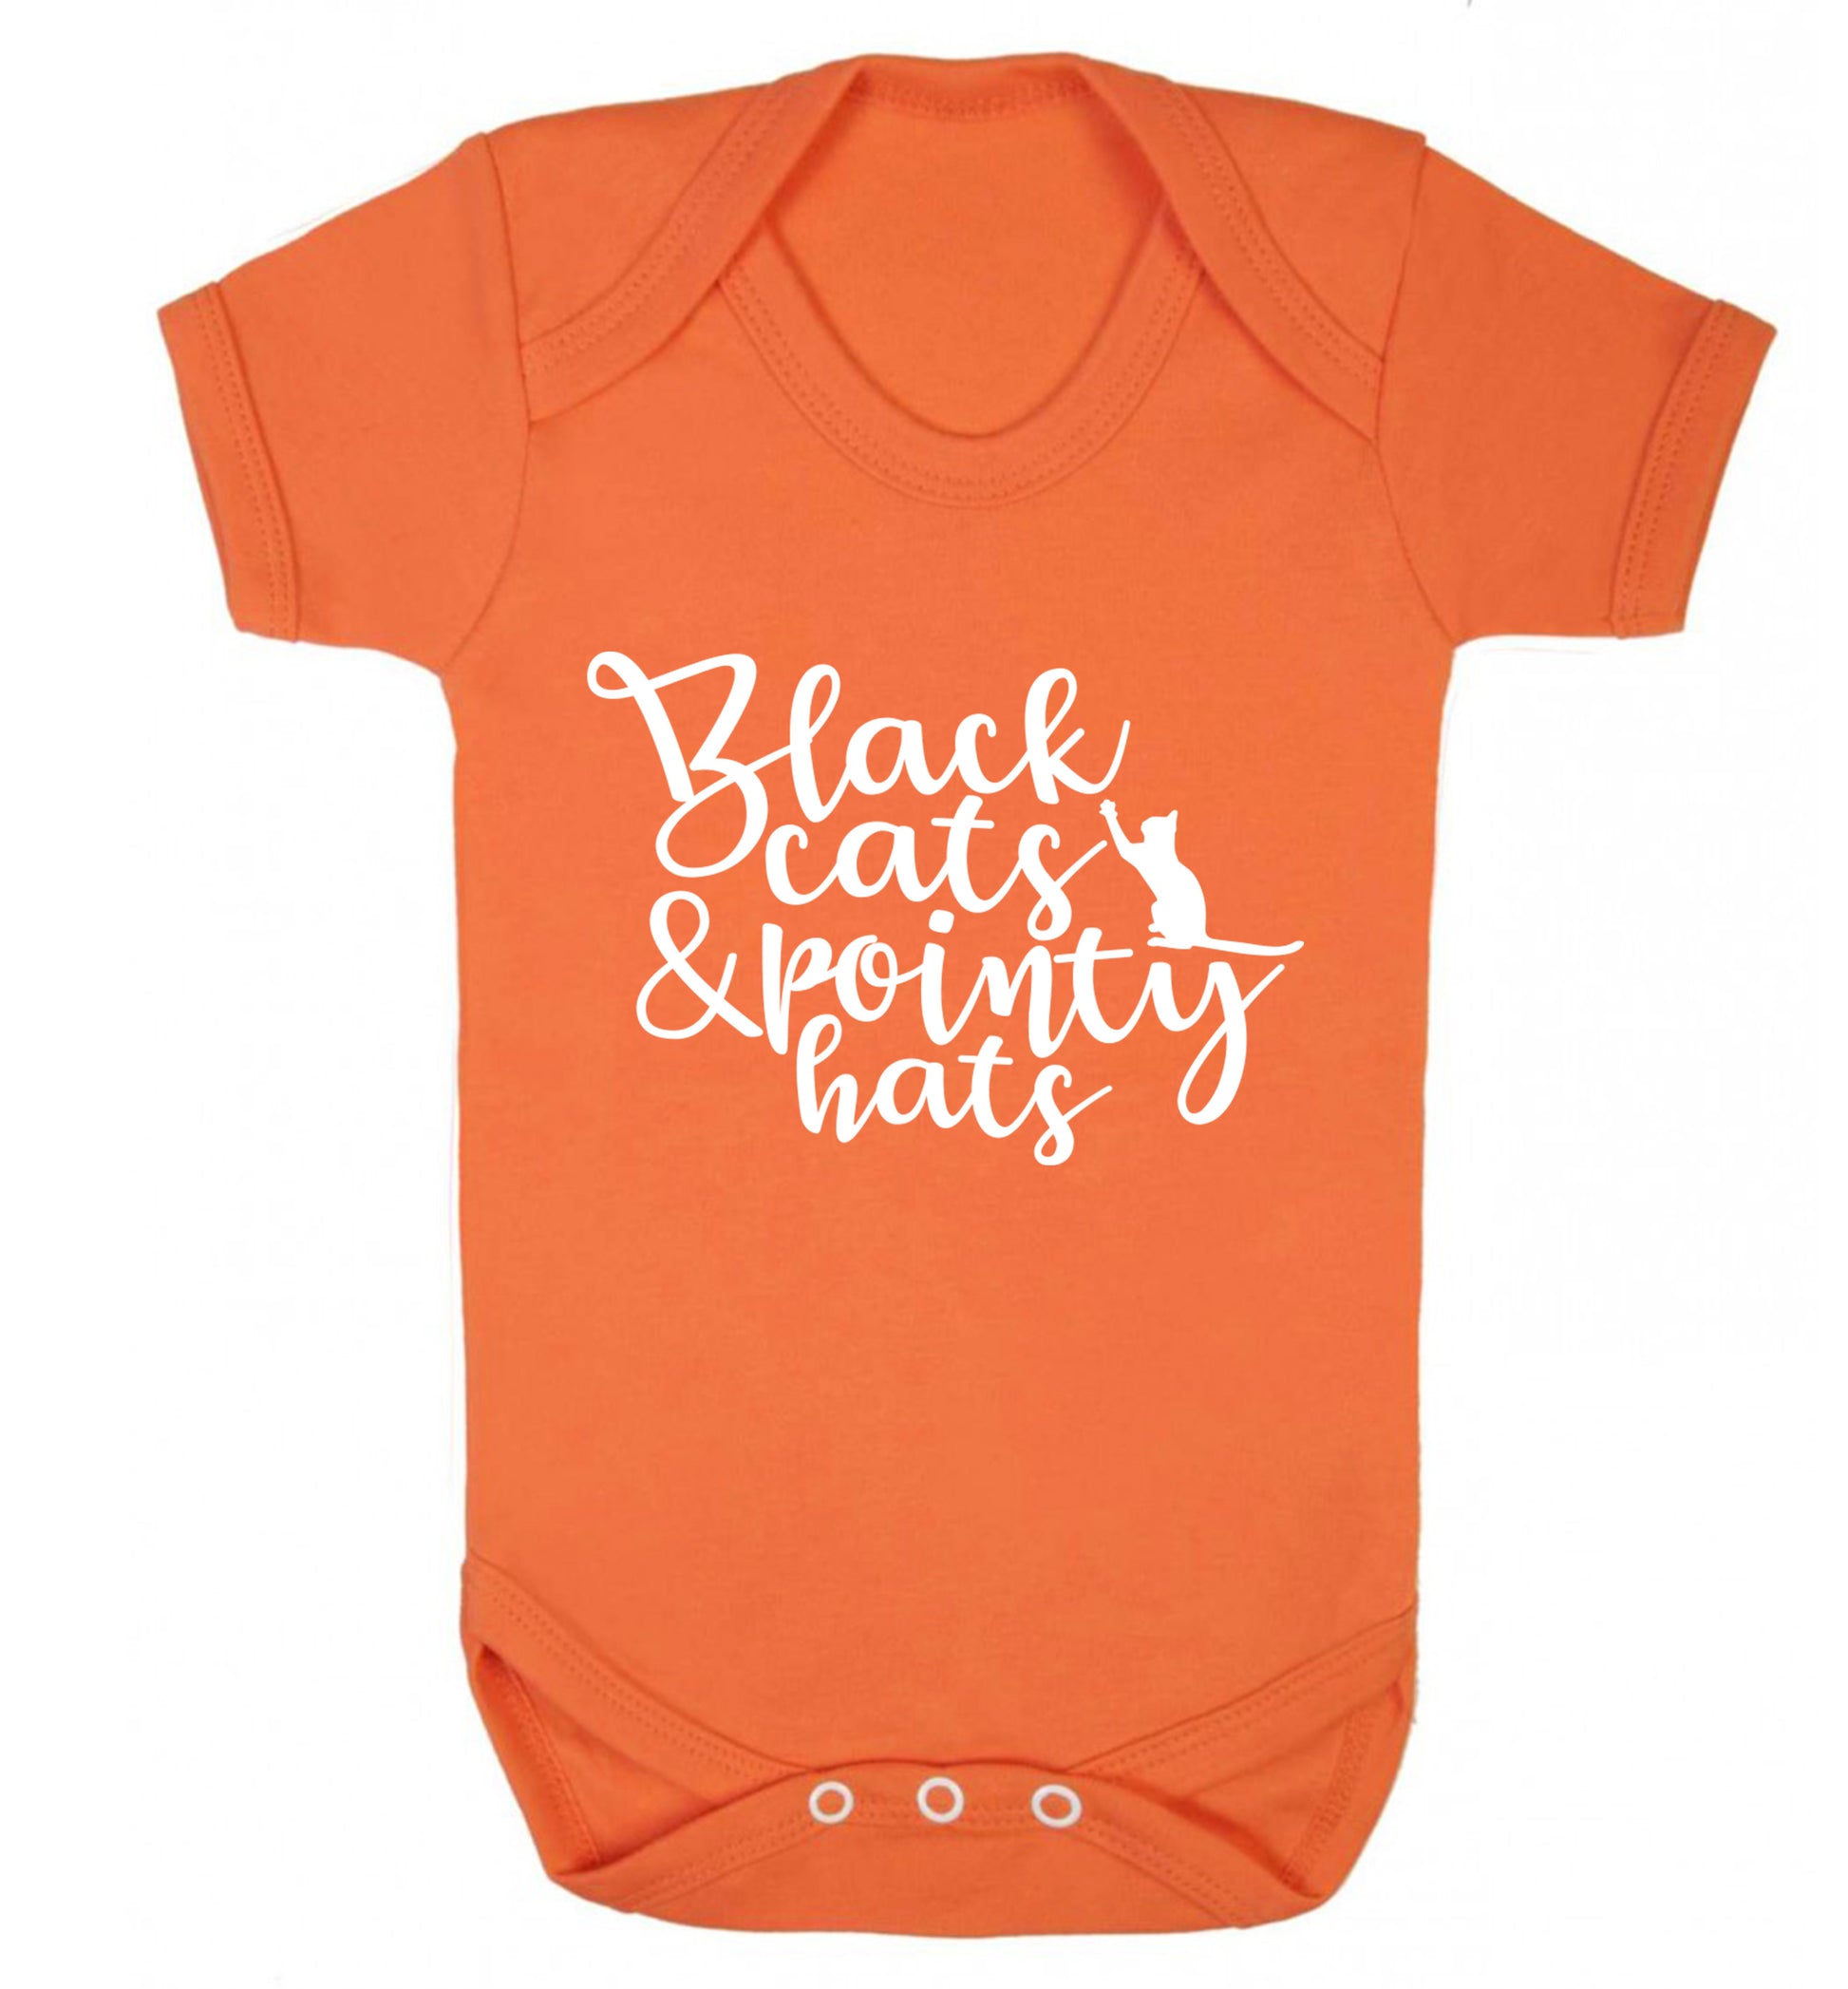 Black cats and pointy hats Baby Vest orange 18-24 months